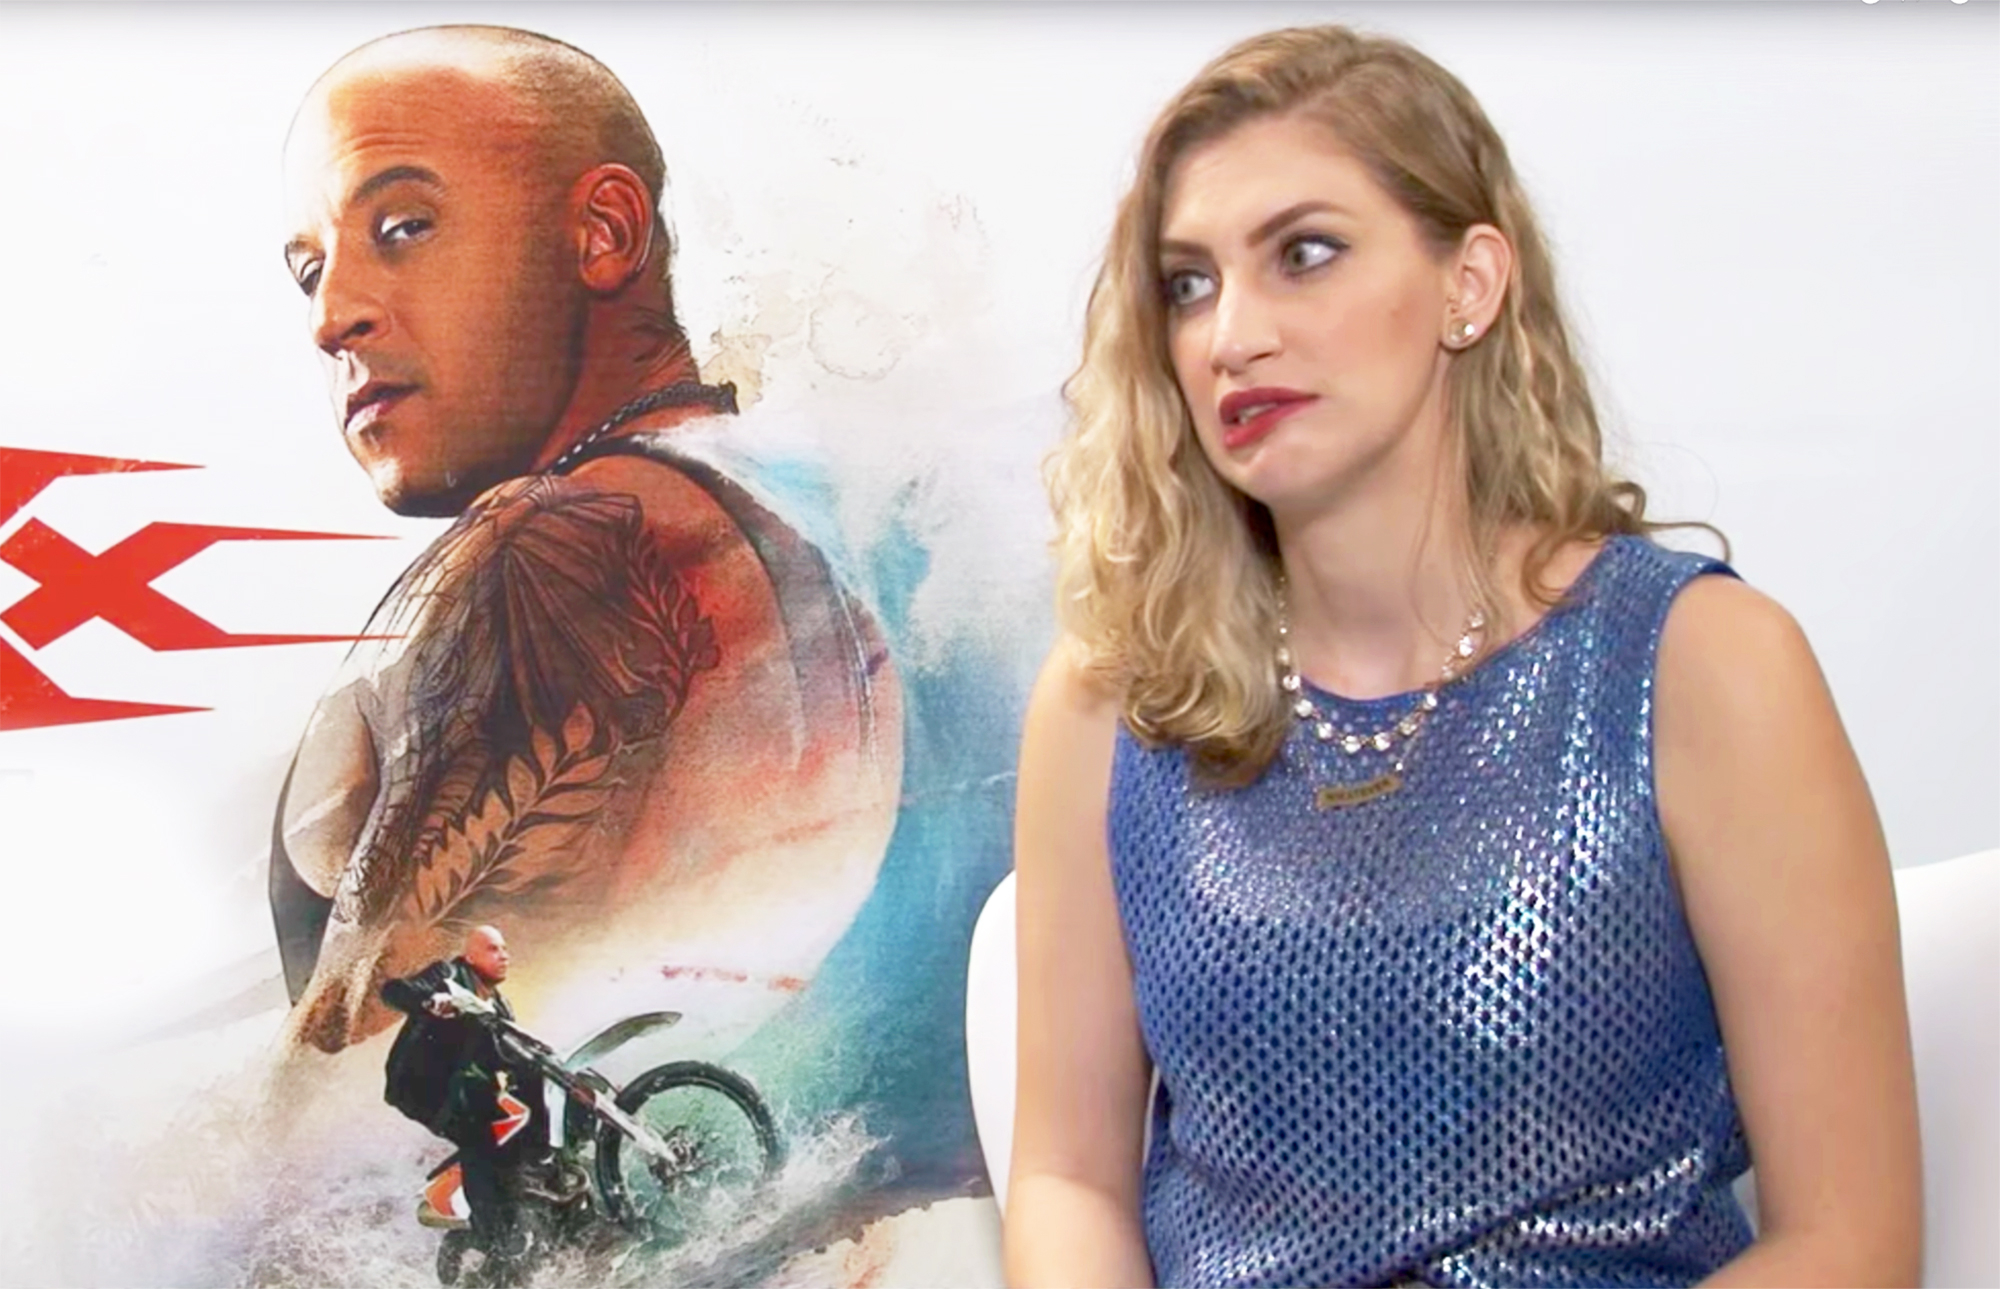 Vin Diesel Makes YouTuber Uncomfortable by Calling Her 'Sexy'